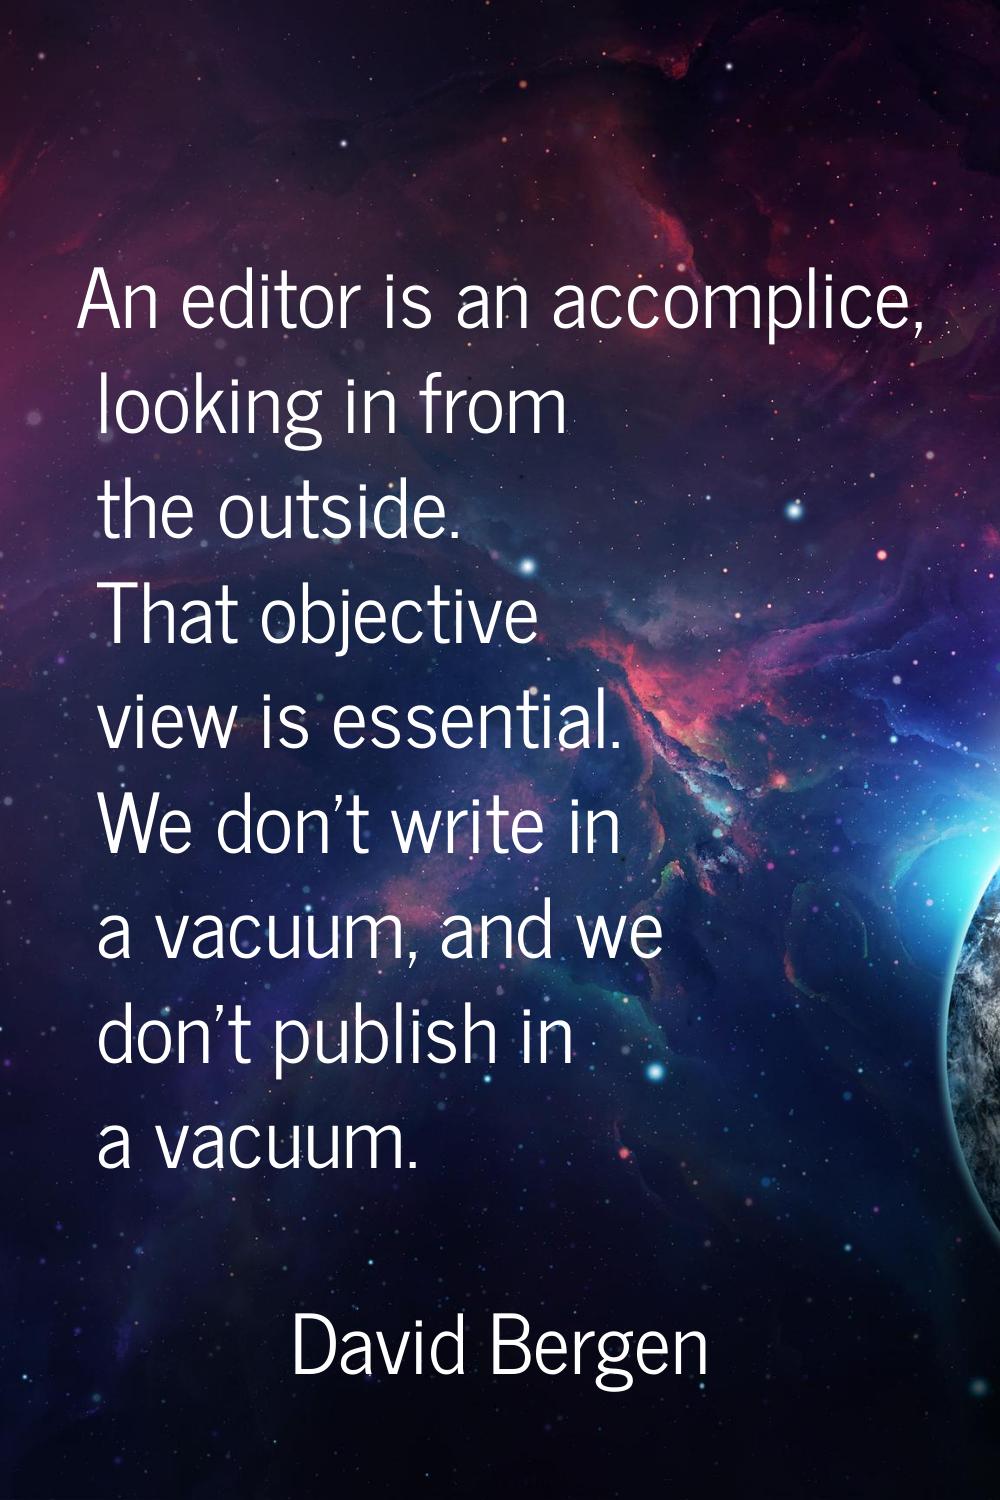 An editor is an accomplice, looking in from the outside. That objective view is essential. We don't